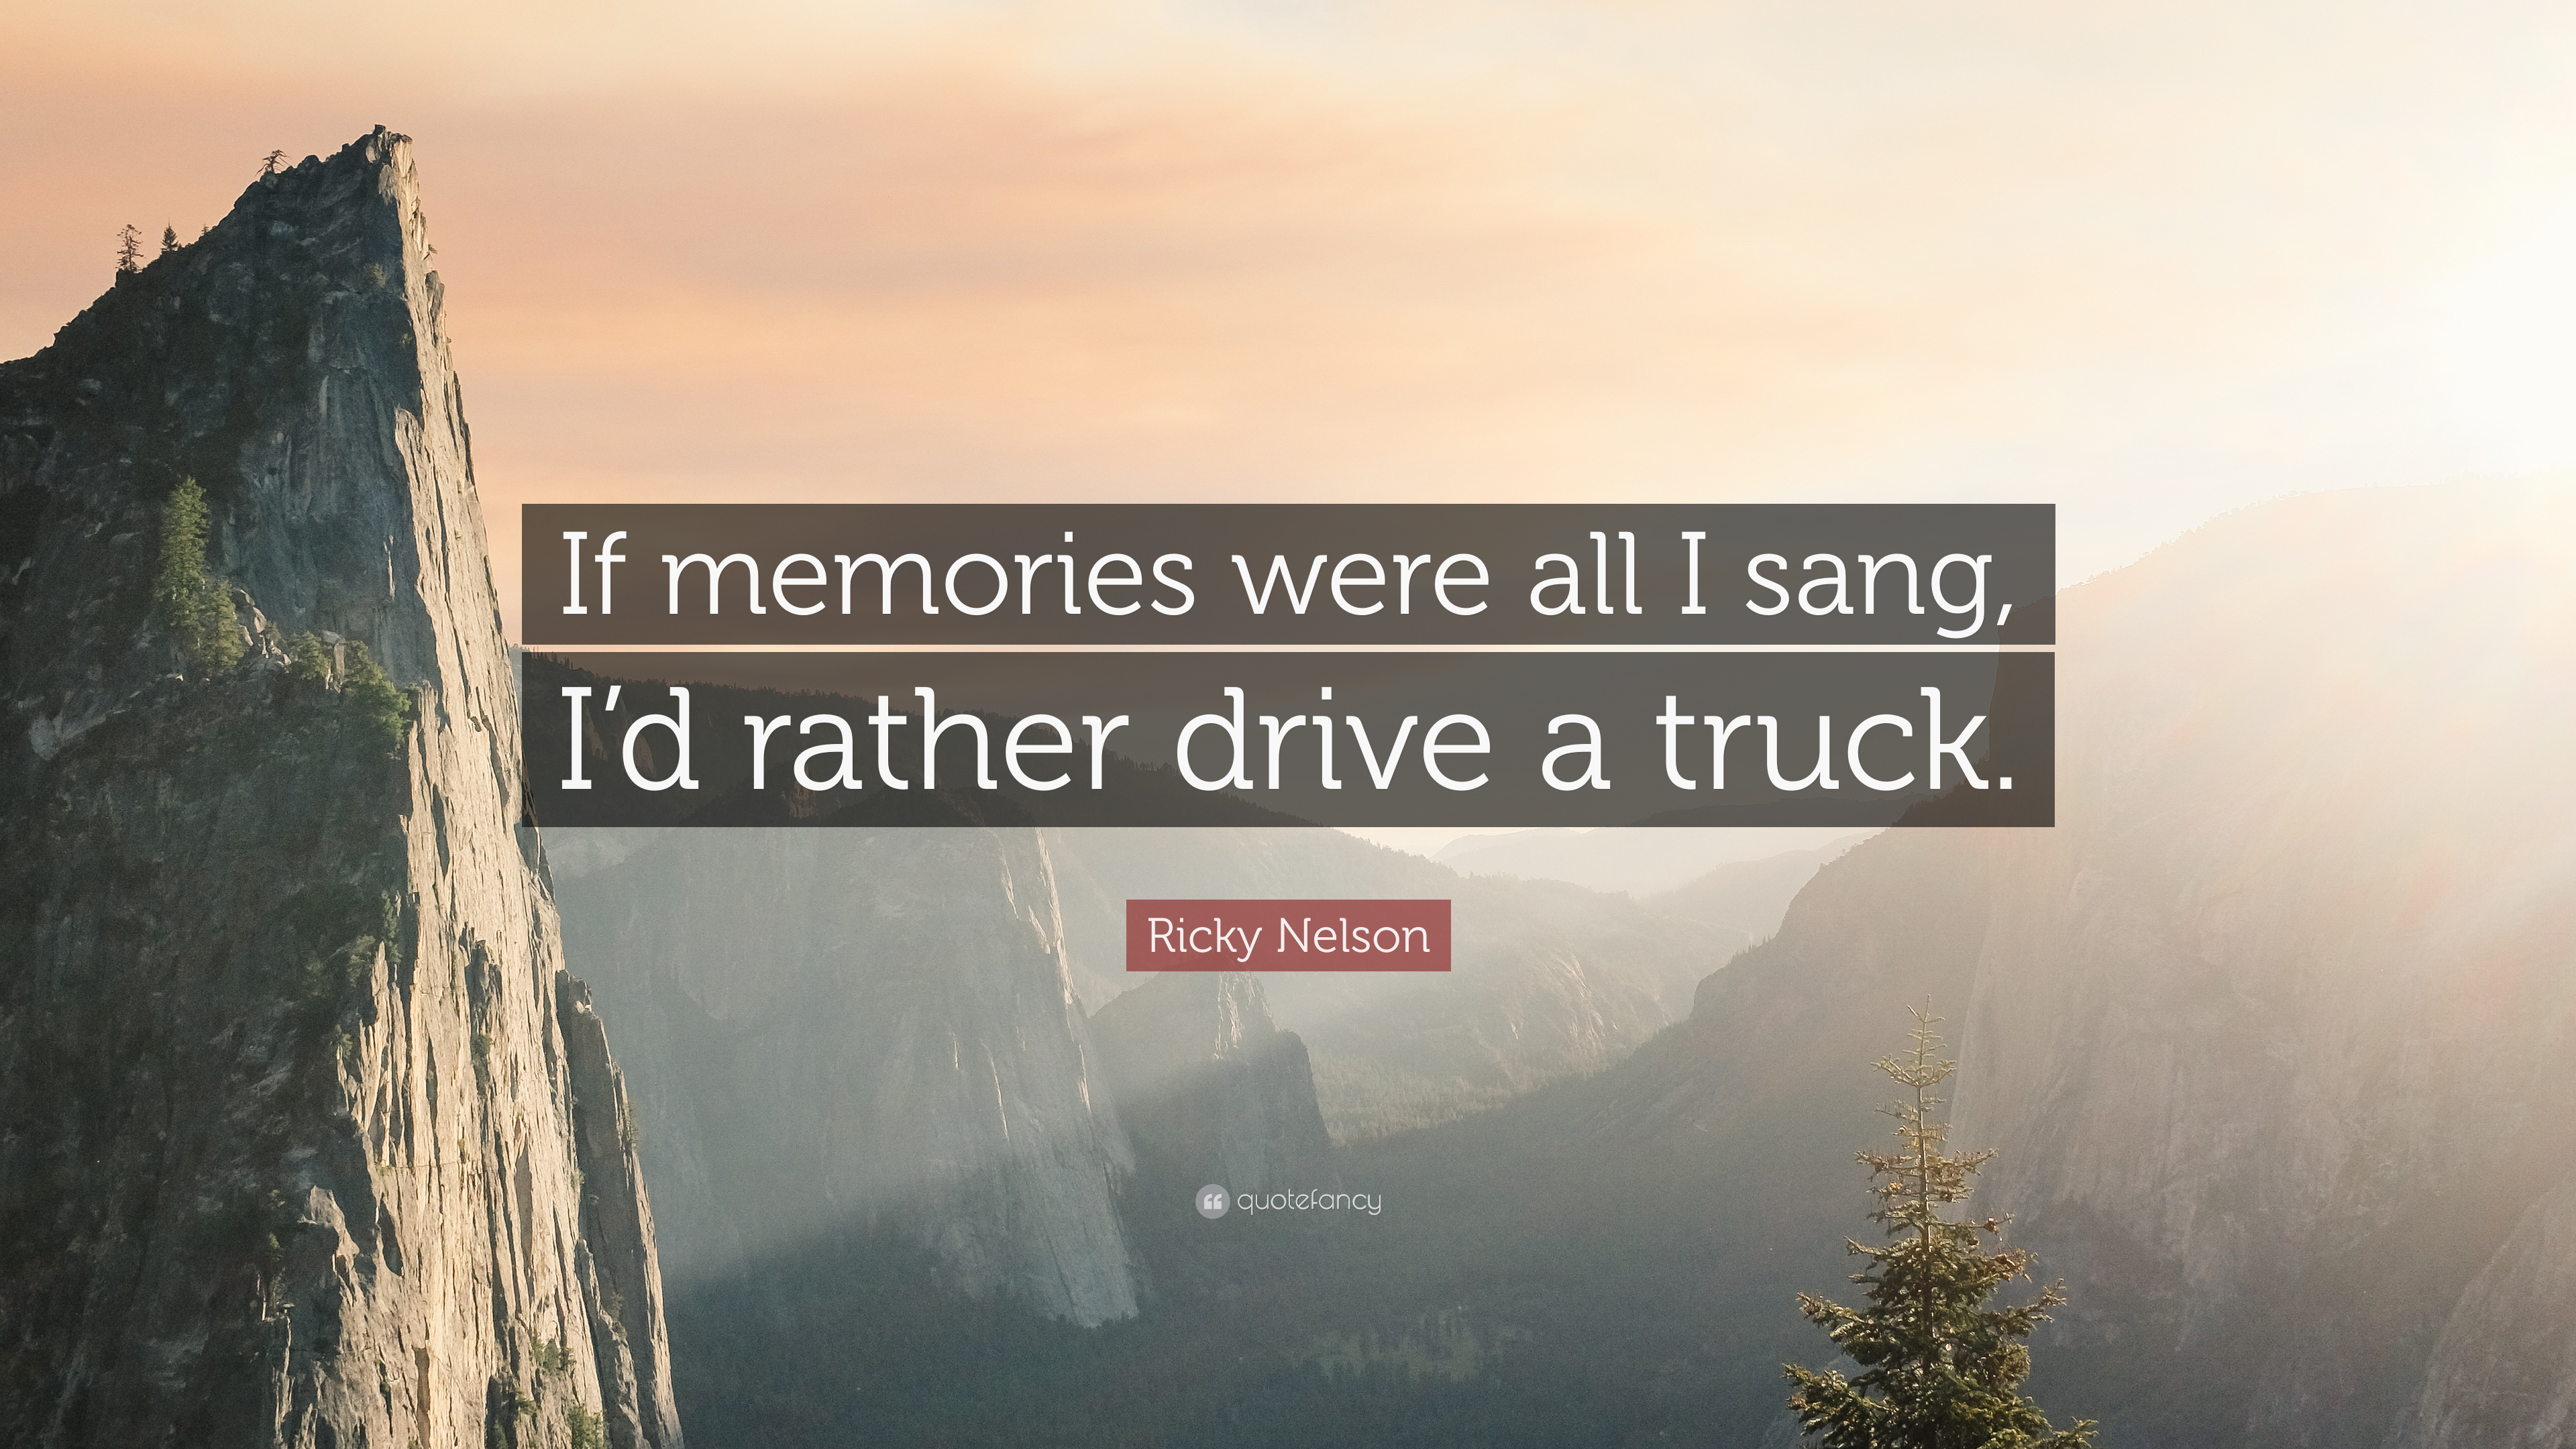 6 Quotes About Ricky Nelson